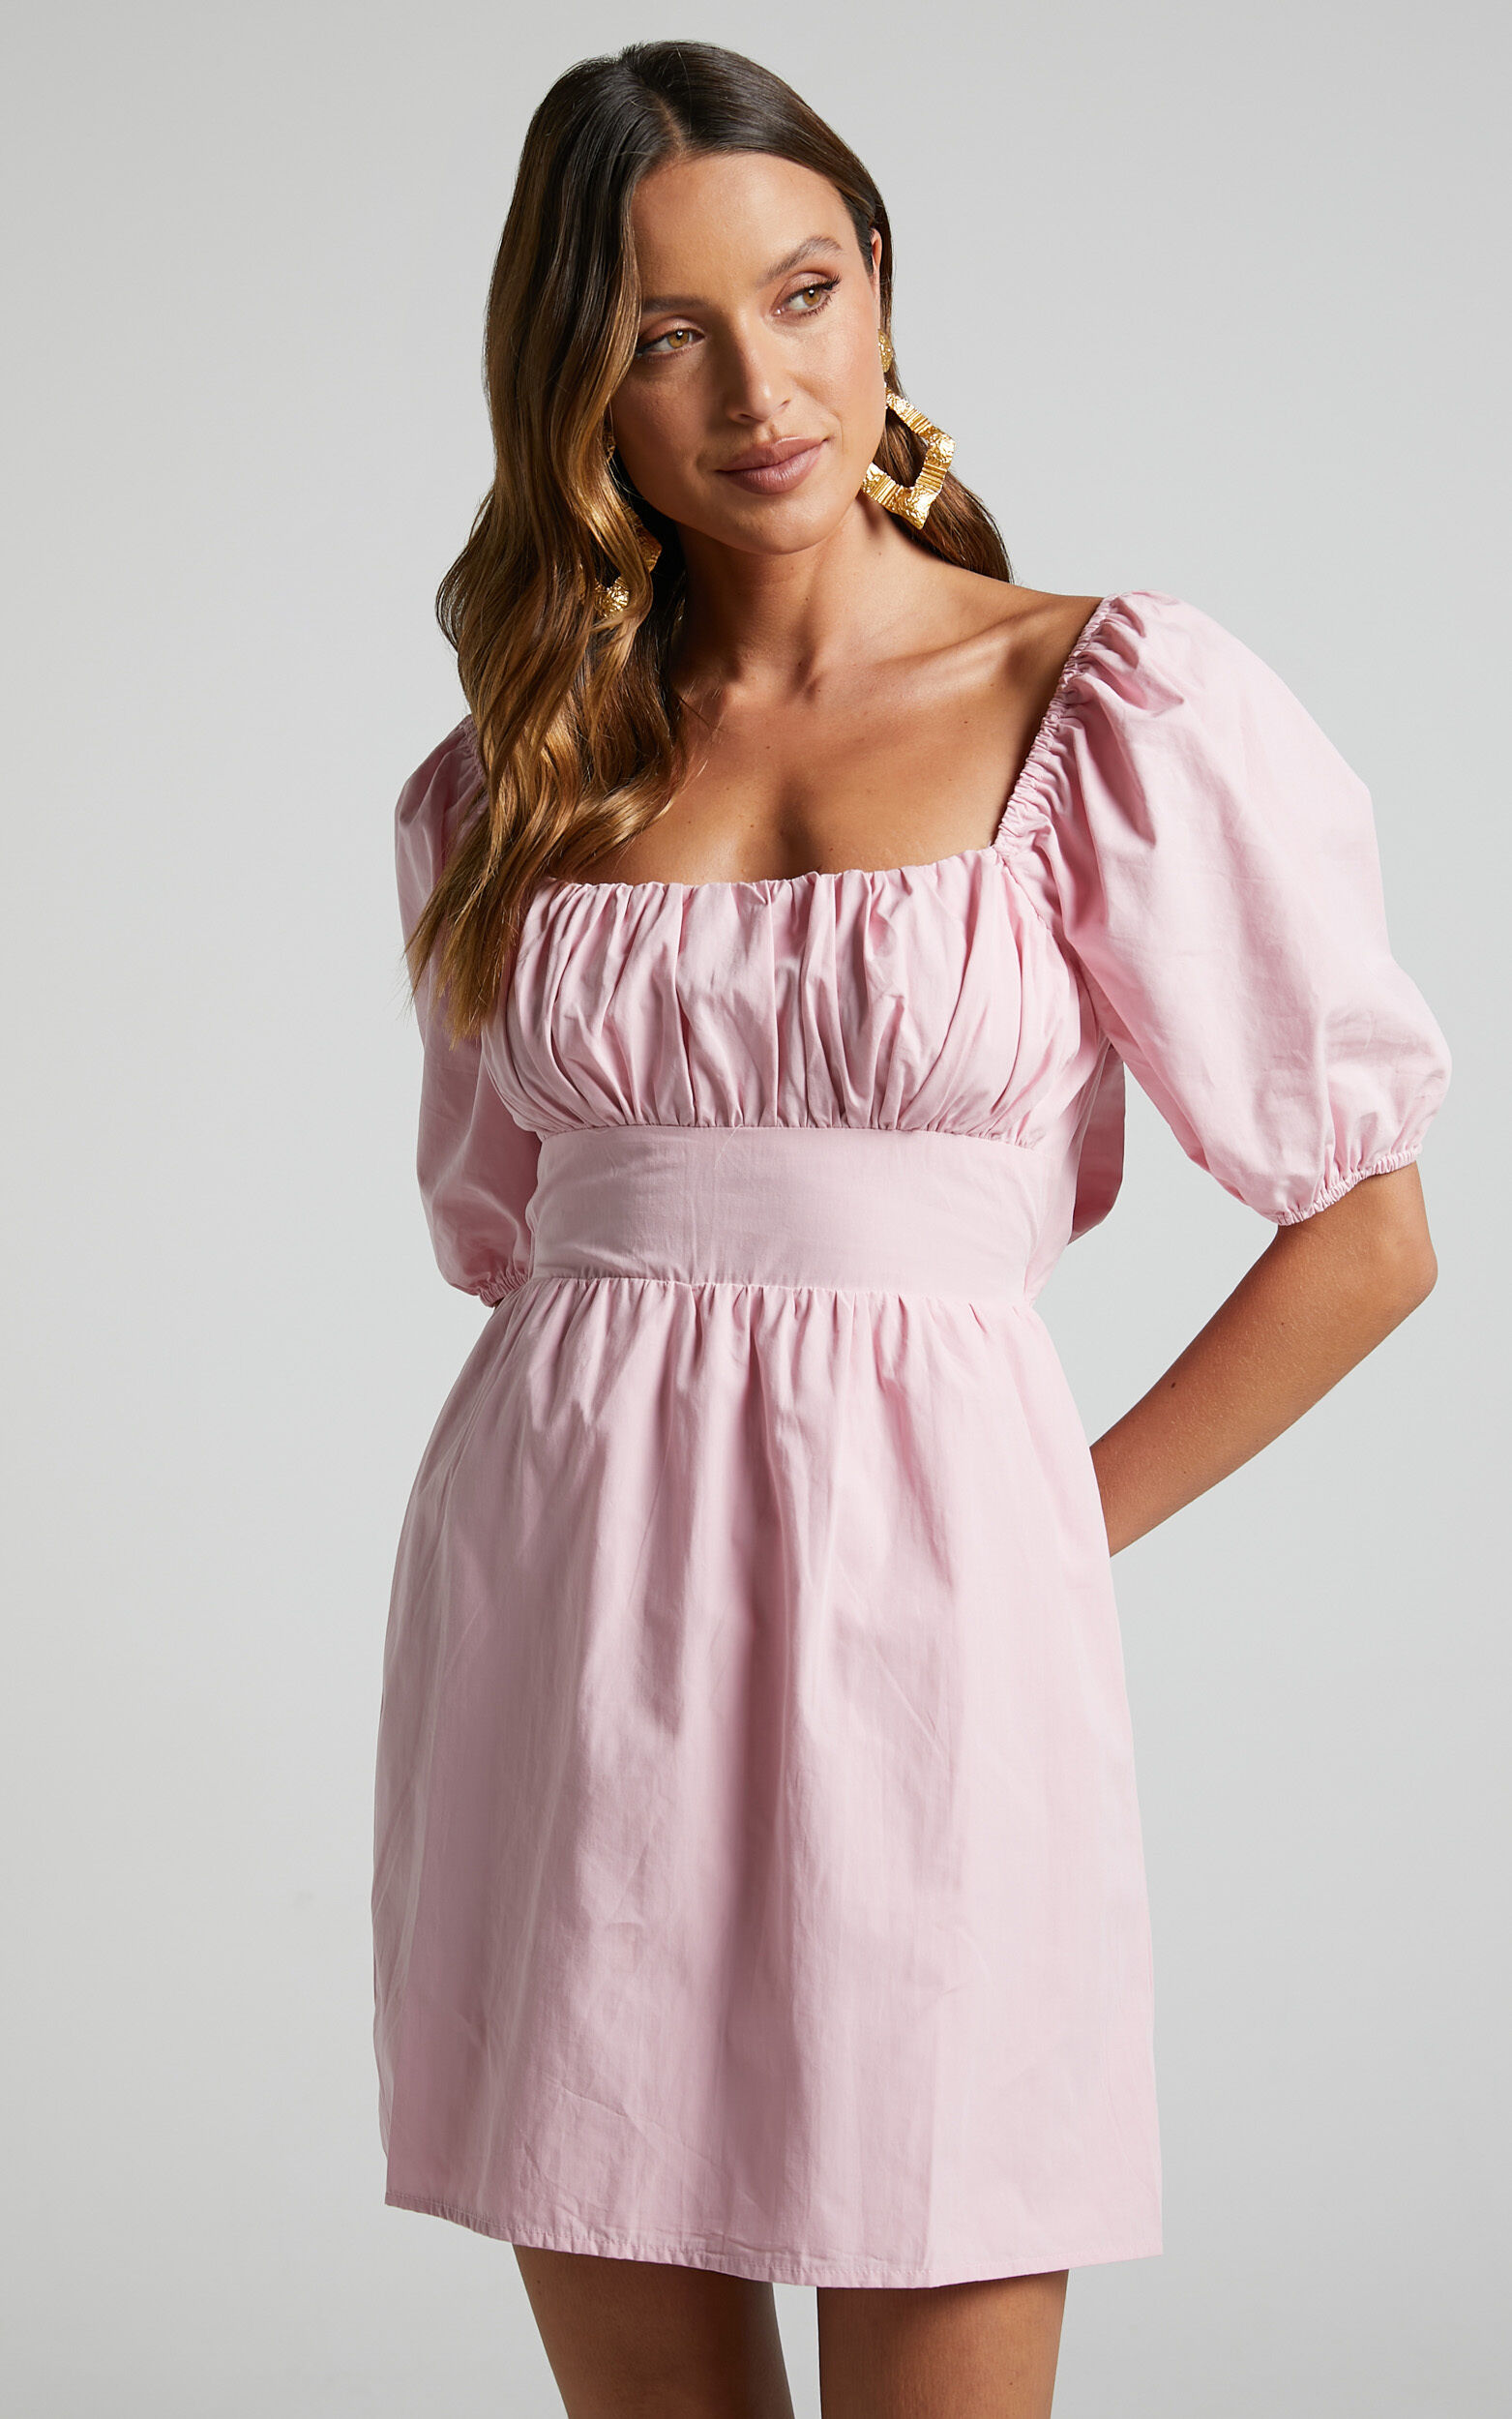 Branson Short Puff Sleeve Tie Back Mini Dress in Pink - 06, PNK1, super-hi-res image number null